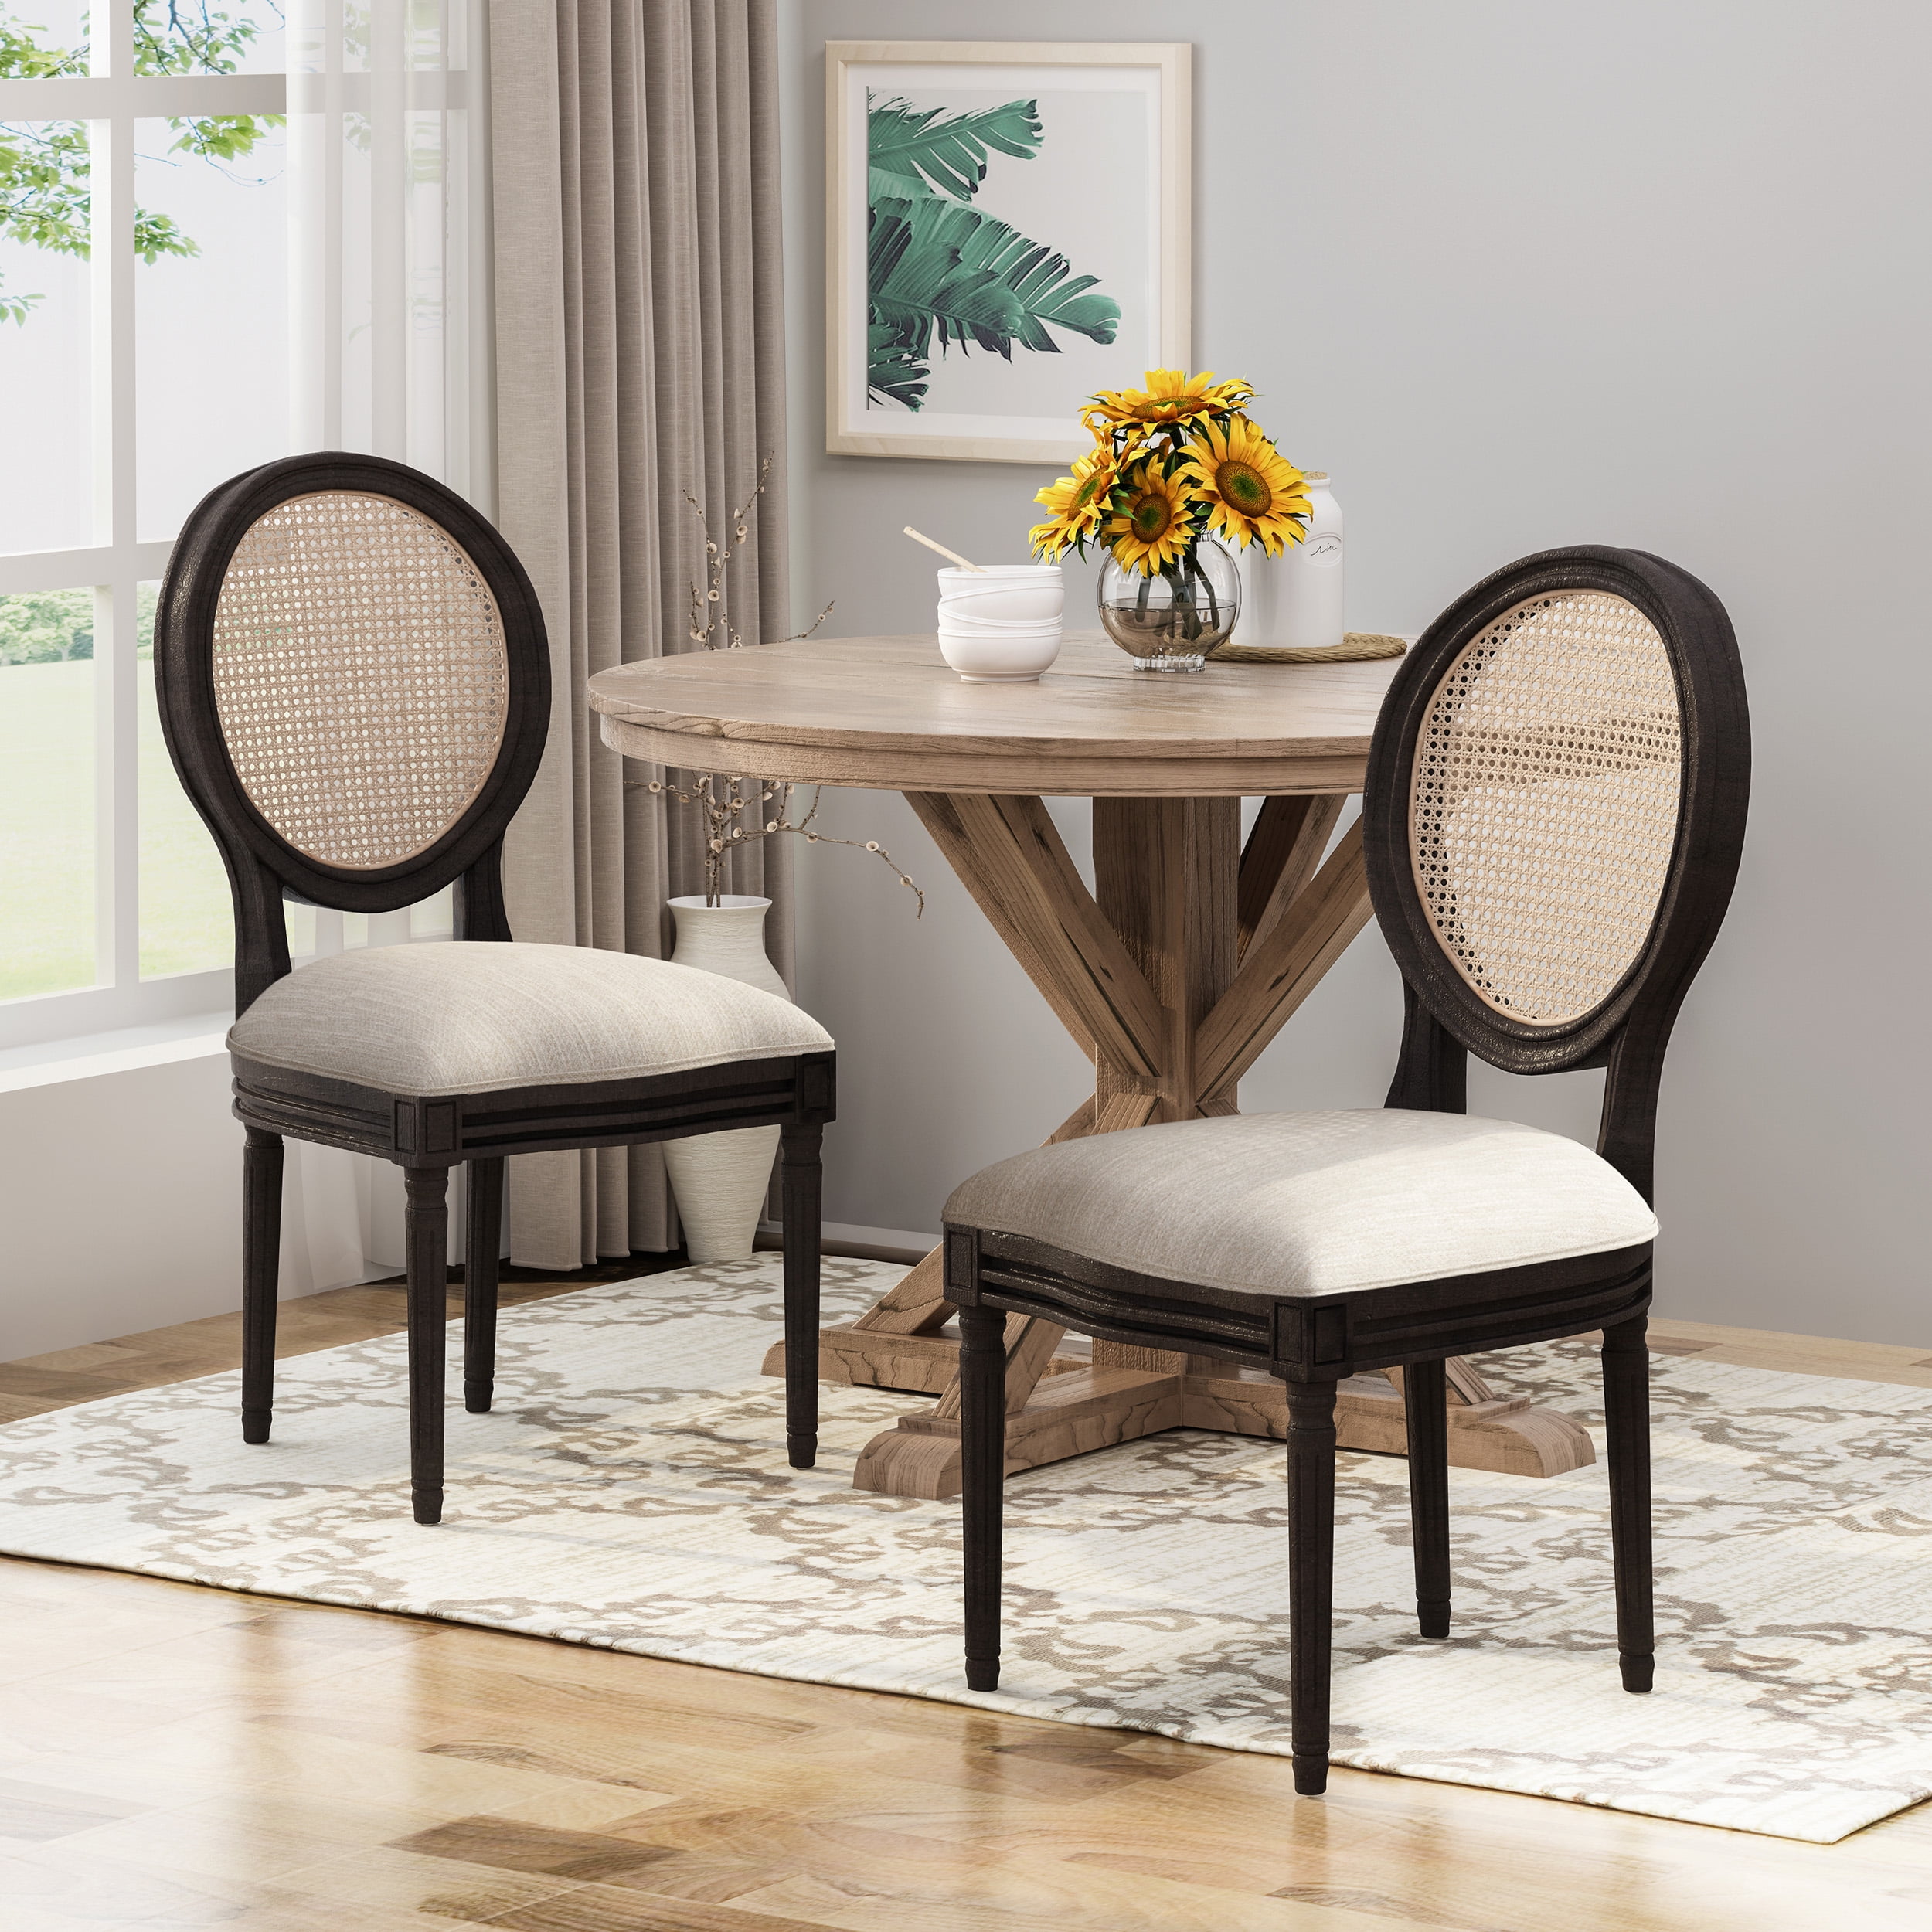 Durable Wooden Dining Chairs For Restaurants